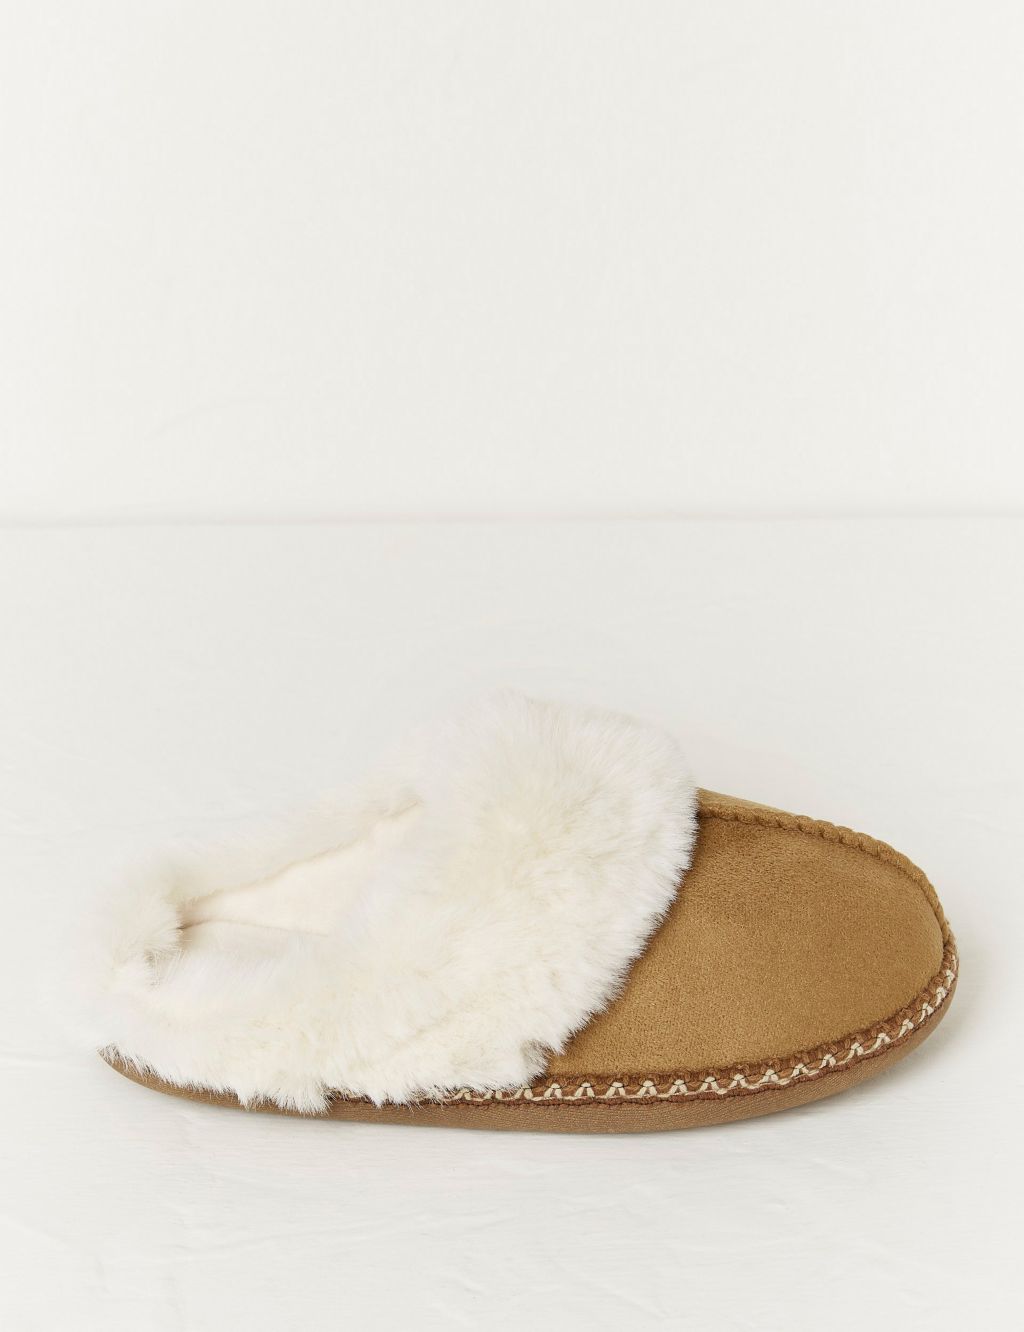 Faux Fur Lined Mule Slippers image 1